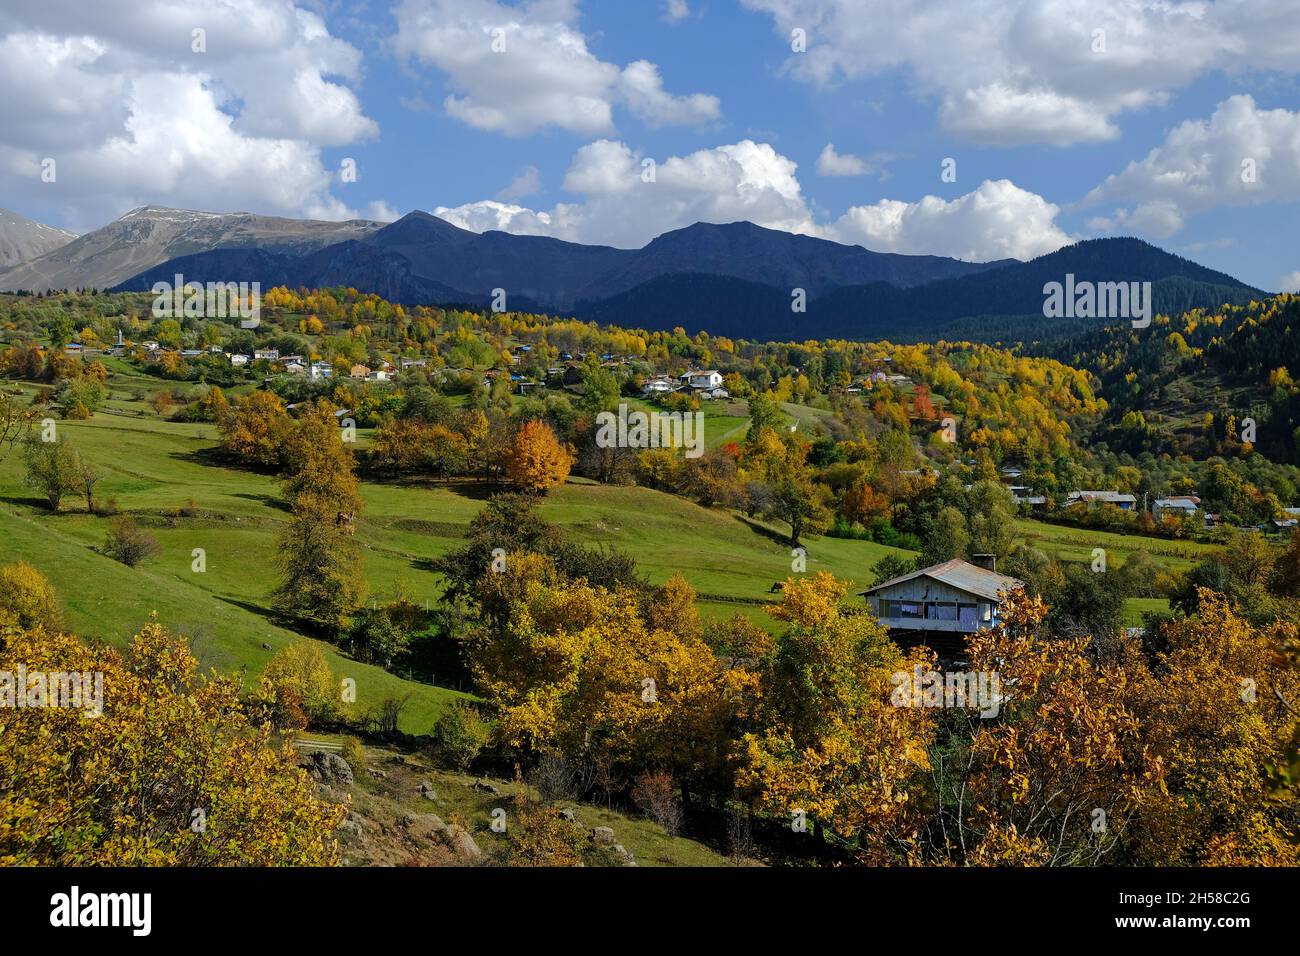 The natural beauties of Artvin province offer wonderful views to its visitors in autumn. Stock Photo